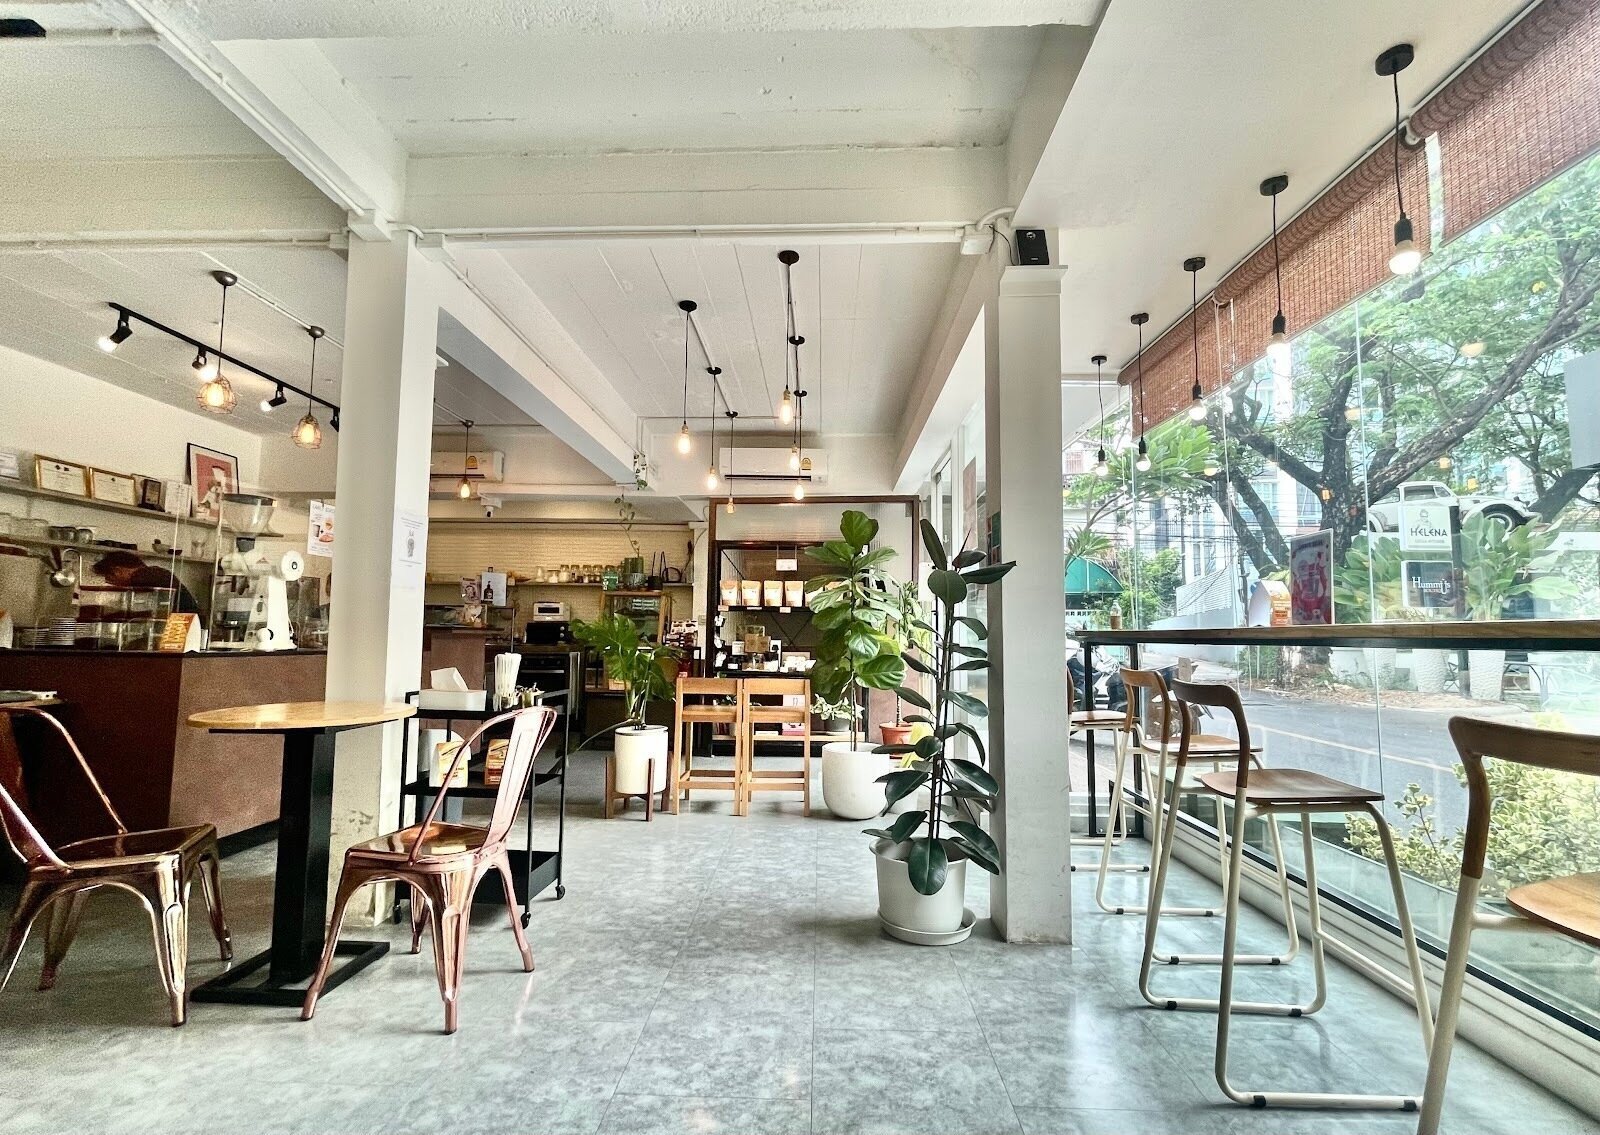 <span class="translation_missing" title="translation missing: en.meta.location_title, location_name: Phil Coffee Co, city: Bangkok">Location Title</span>